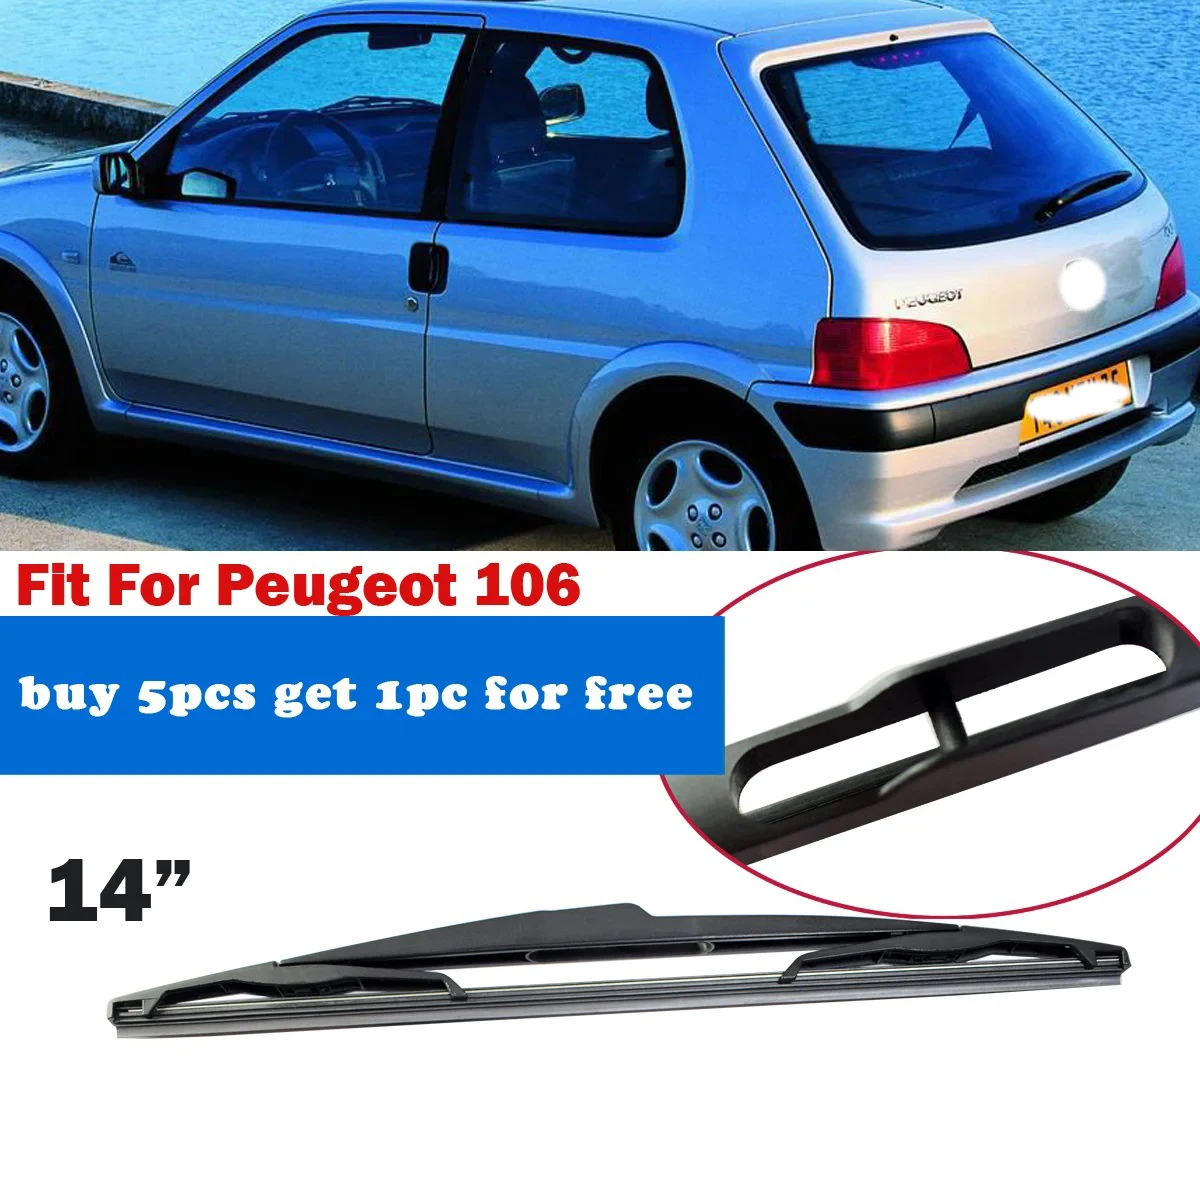 

1PC Car Rear Wiper Blade 14" Windscreen Windshield Auto Wipers Accessories for Peugeot 106 YC102012-106